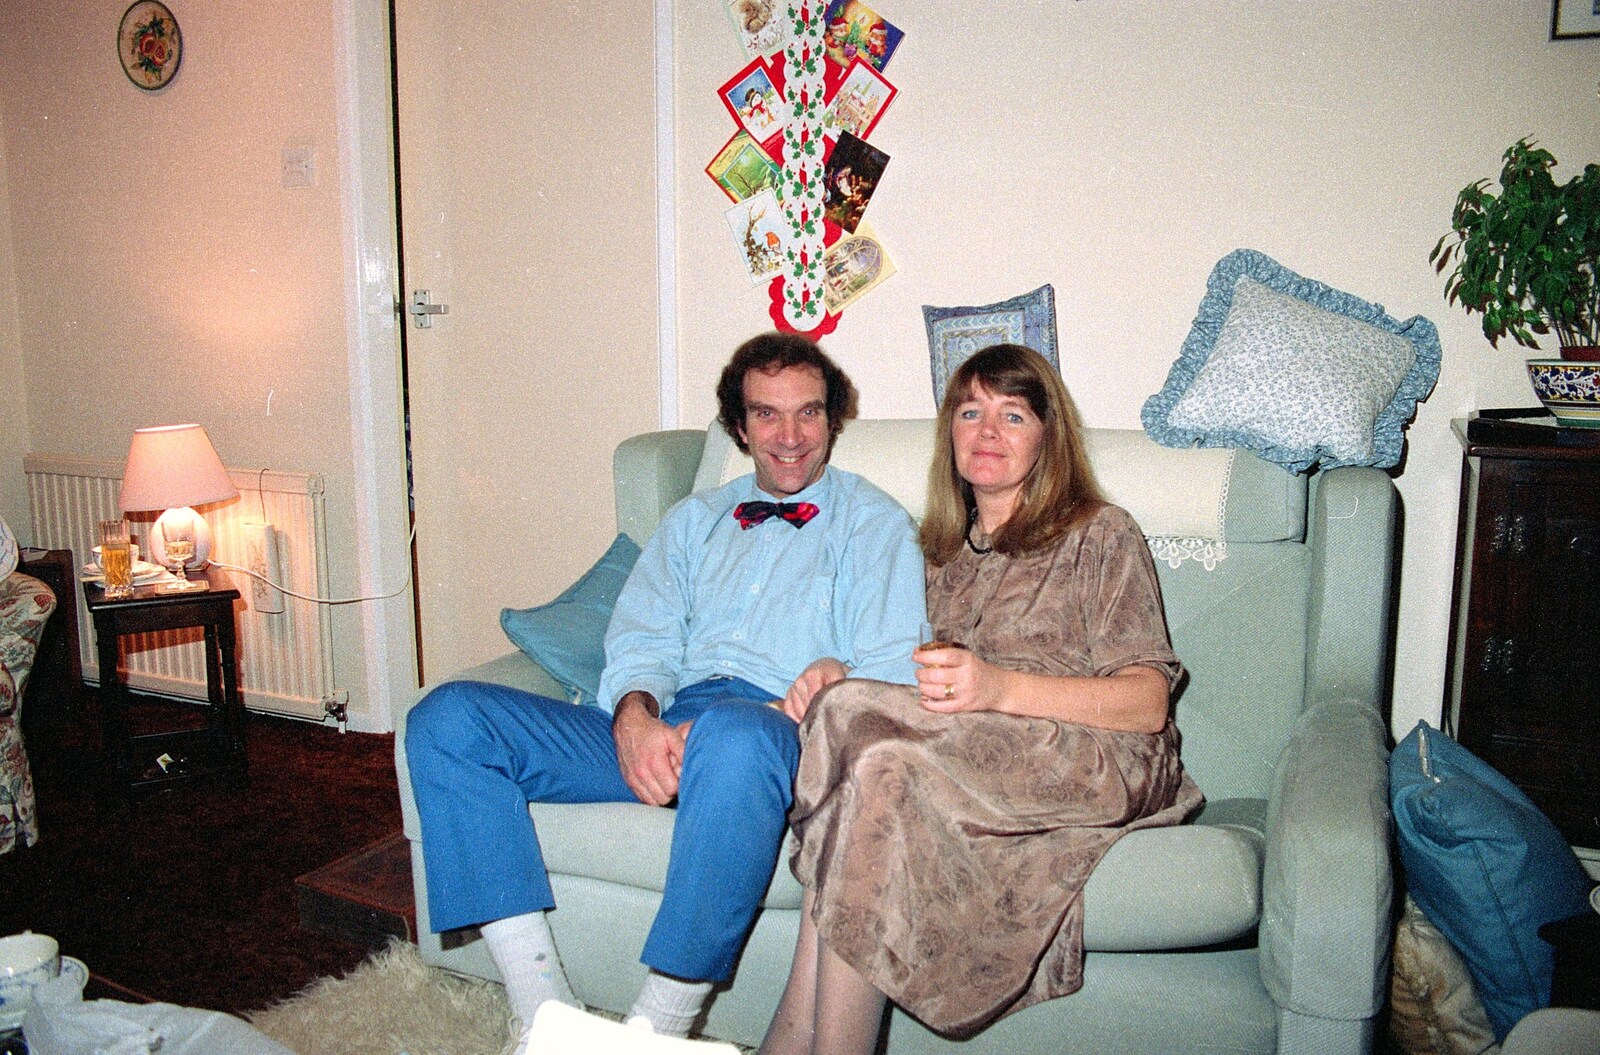 Mike and Mother from Christmas at Pitt Farm, Harbertonford, Devon - 25th December 1988